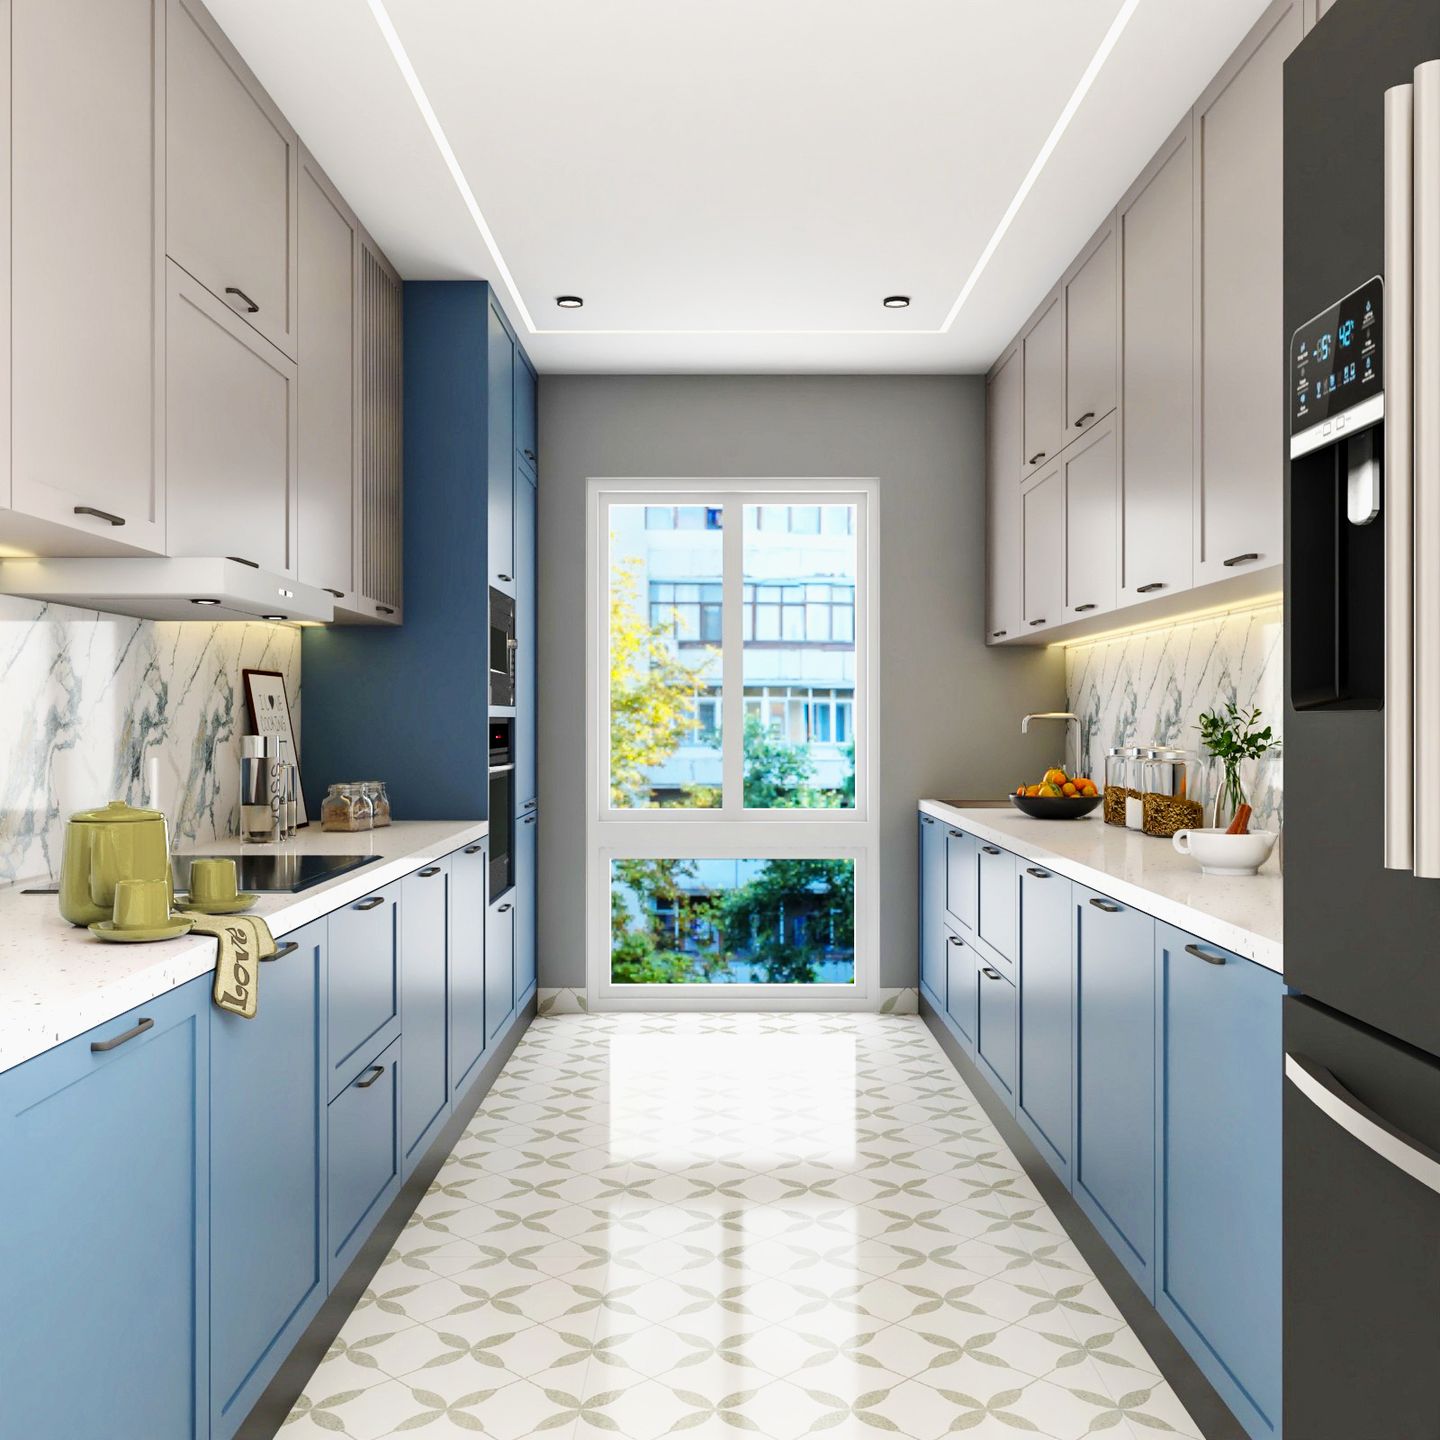 12x8 Ft Parallel Modular Kitchen Design With Cielo Blue And Off-White Cabinetry - Livspace